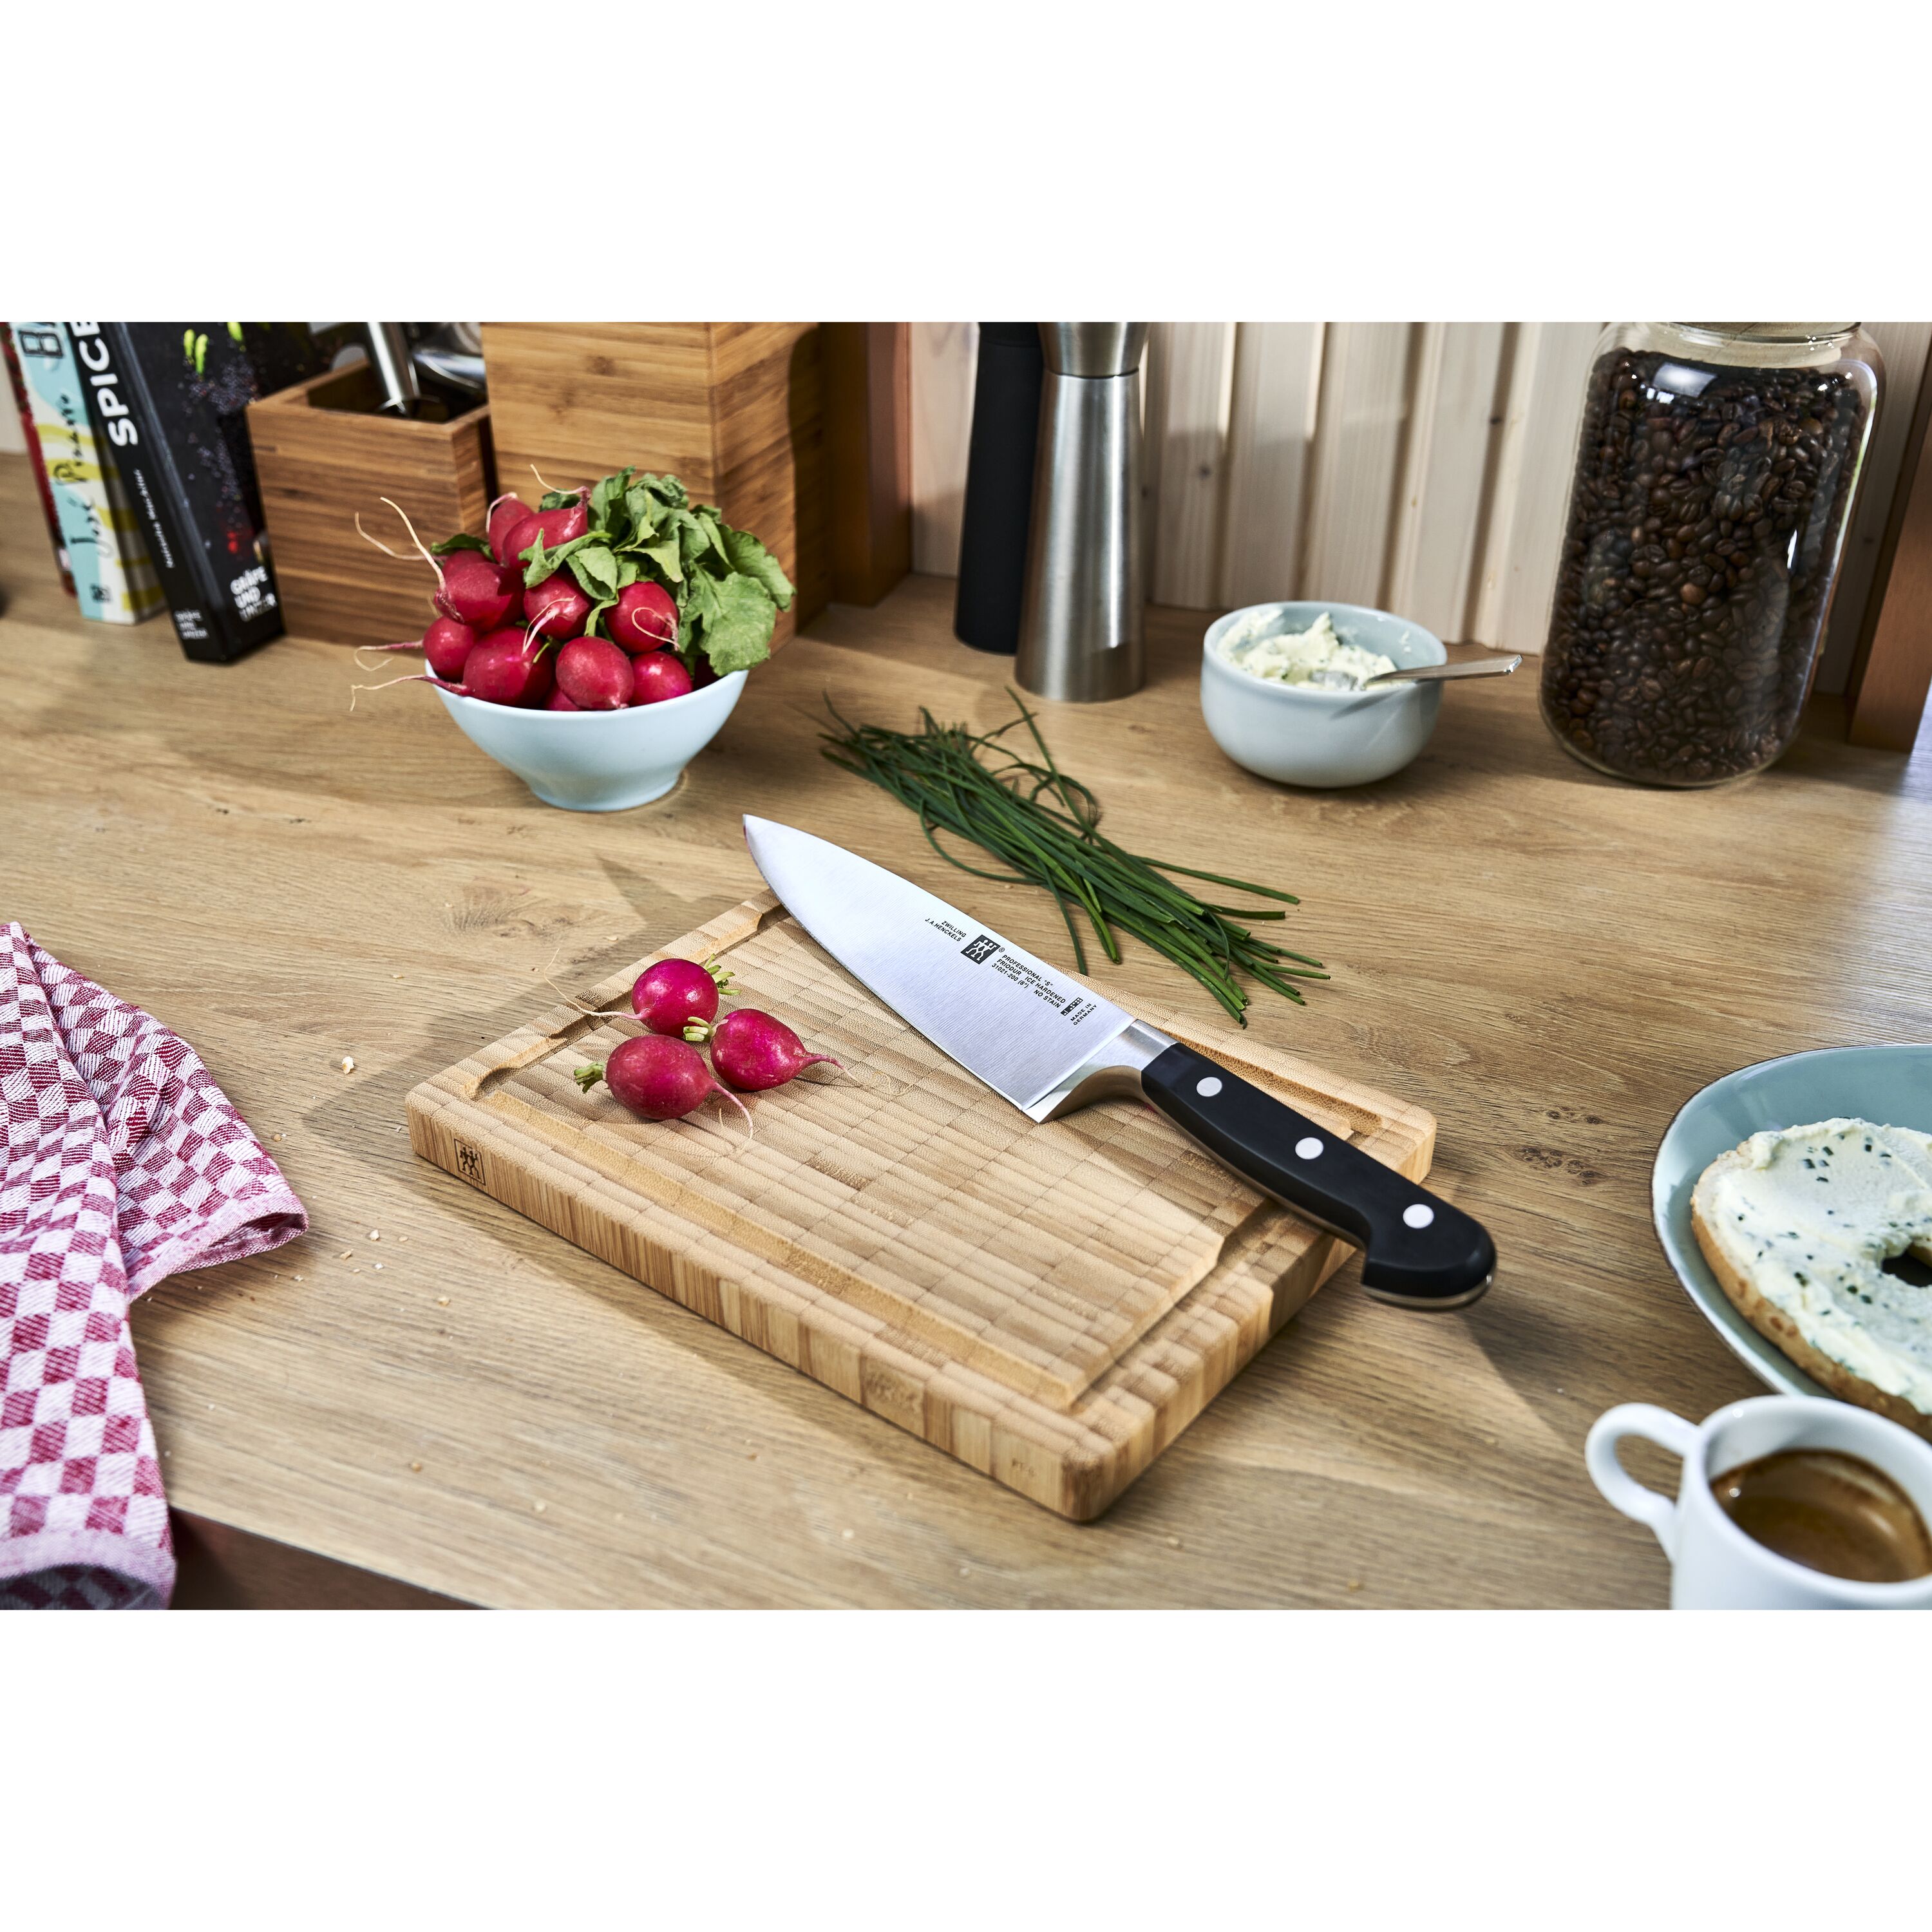 Zwilling Professional S 8 Chef's Knife – PERFECT EDGE CUTLERY